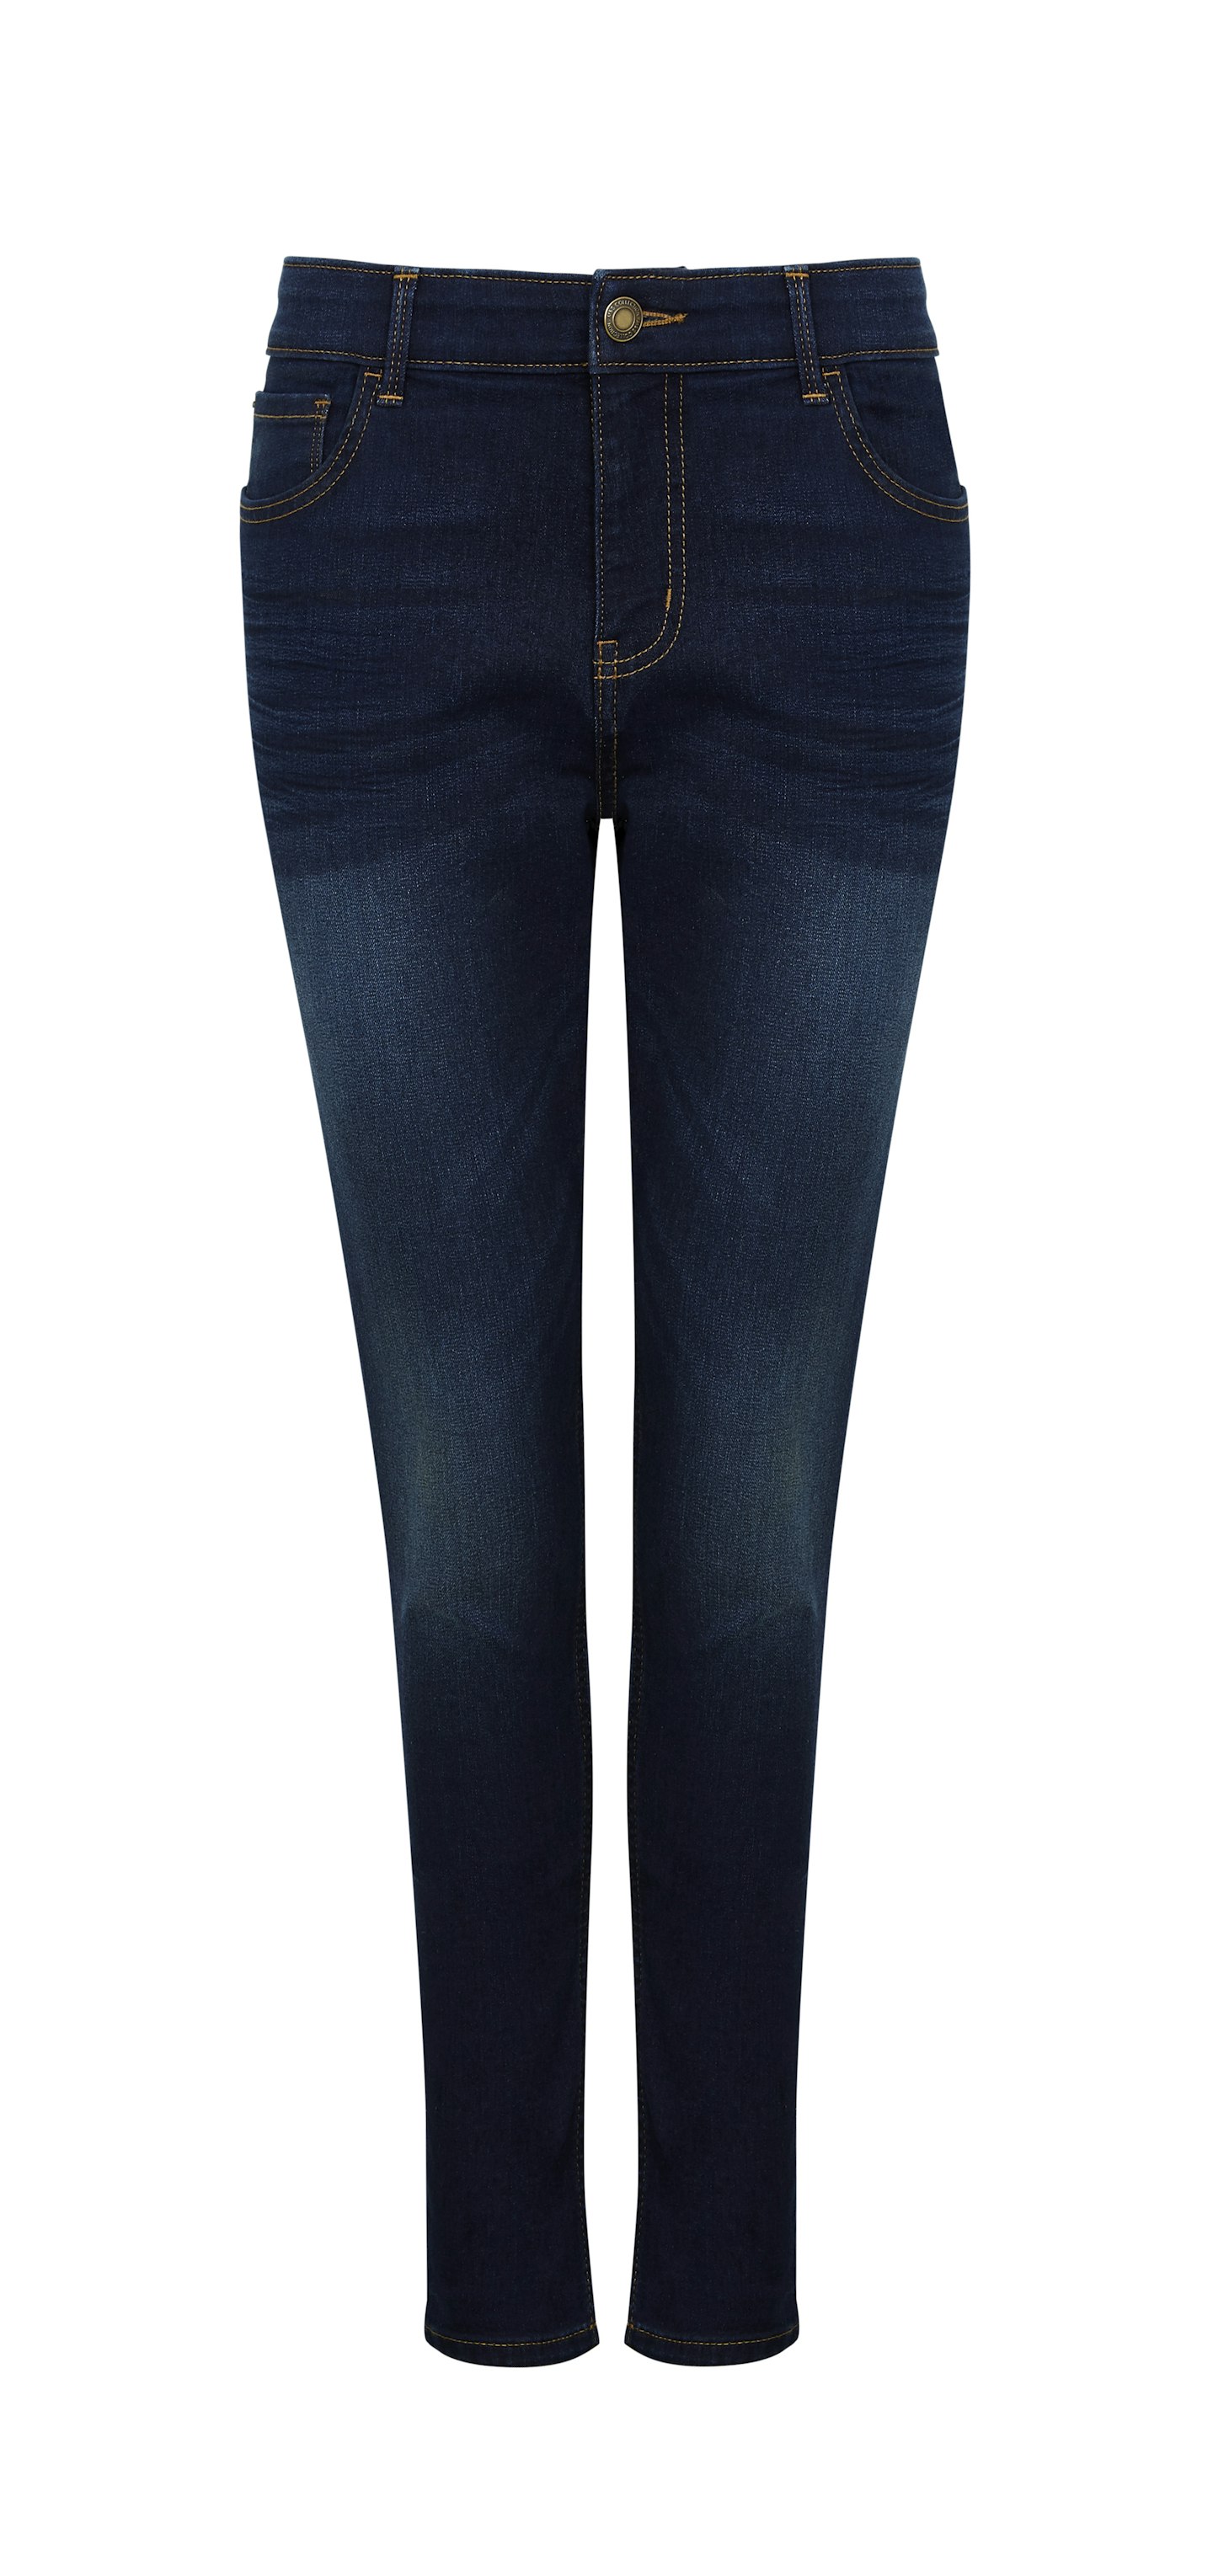 Holly Willoughby Ivy skinny leg jeans, 19.50